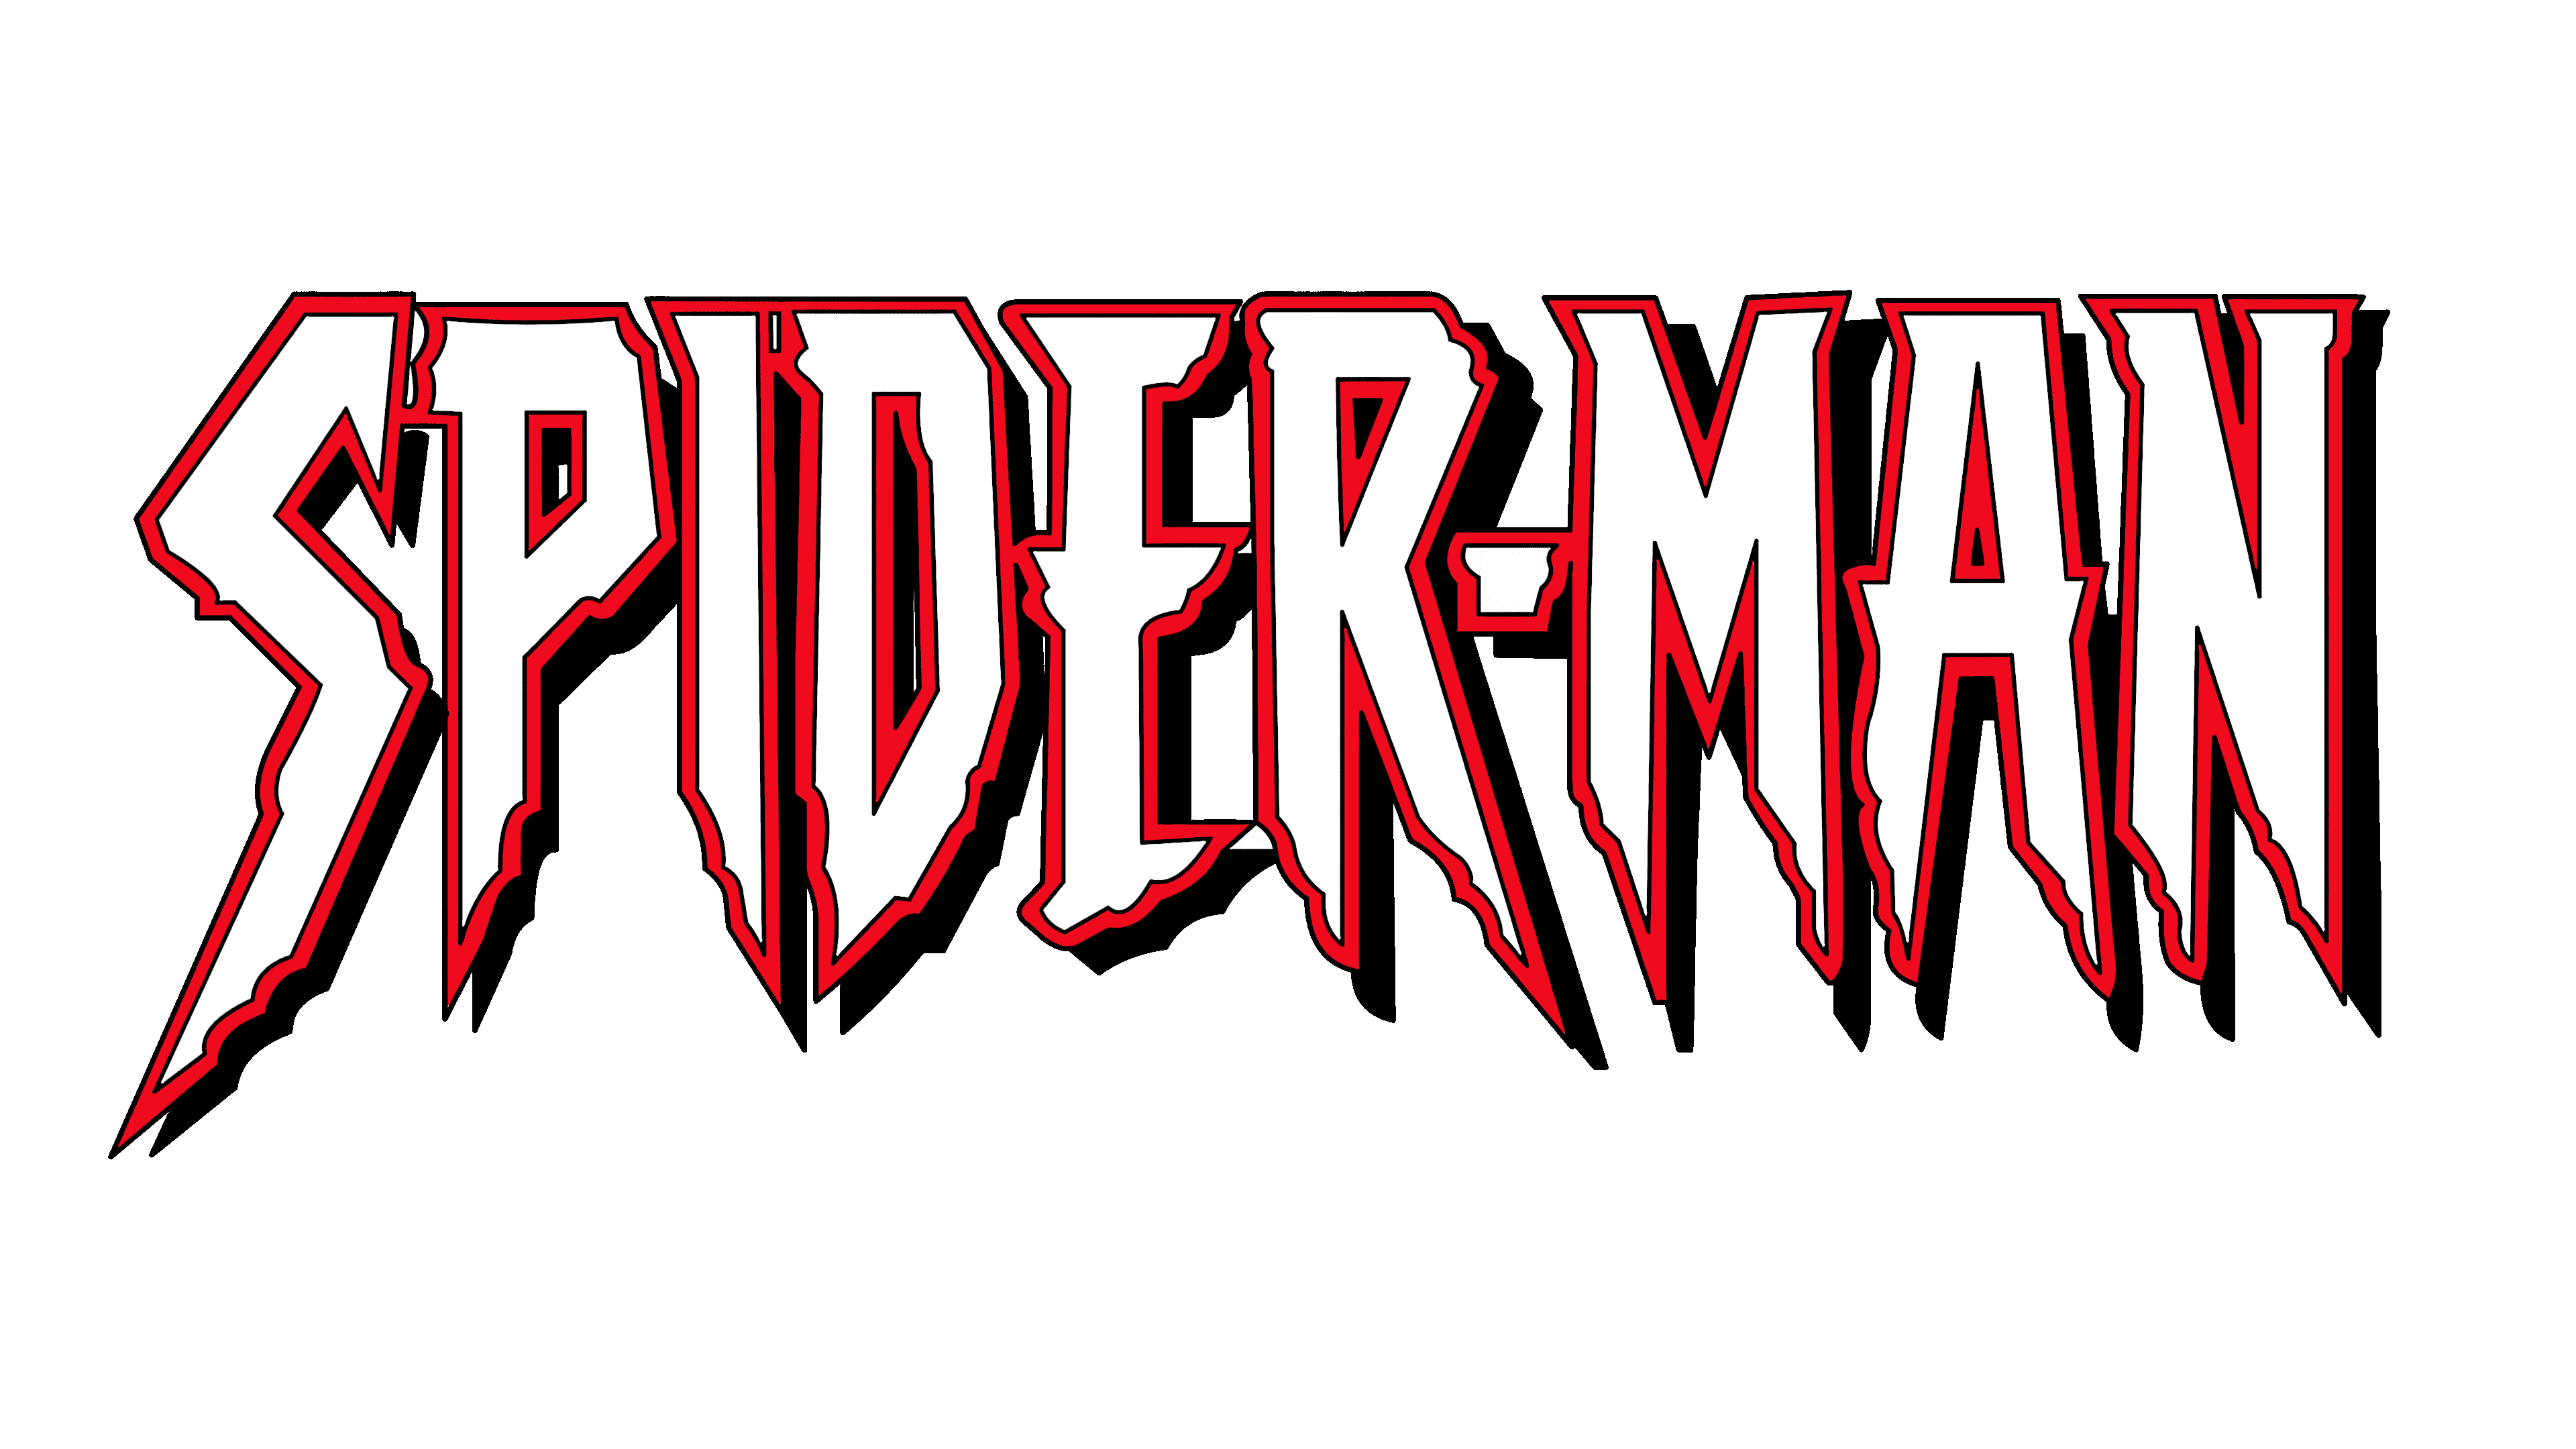 Spiderman Logo And Symbol Meaning History Png Brand